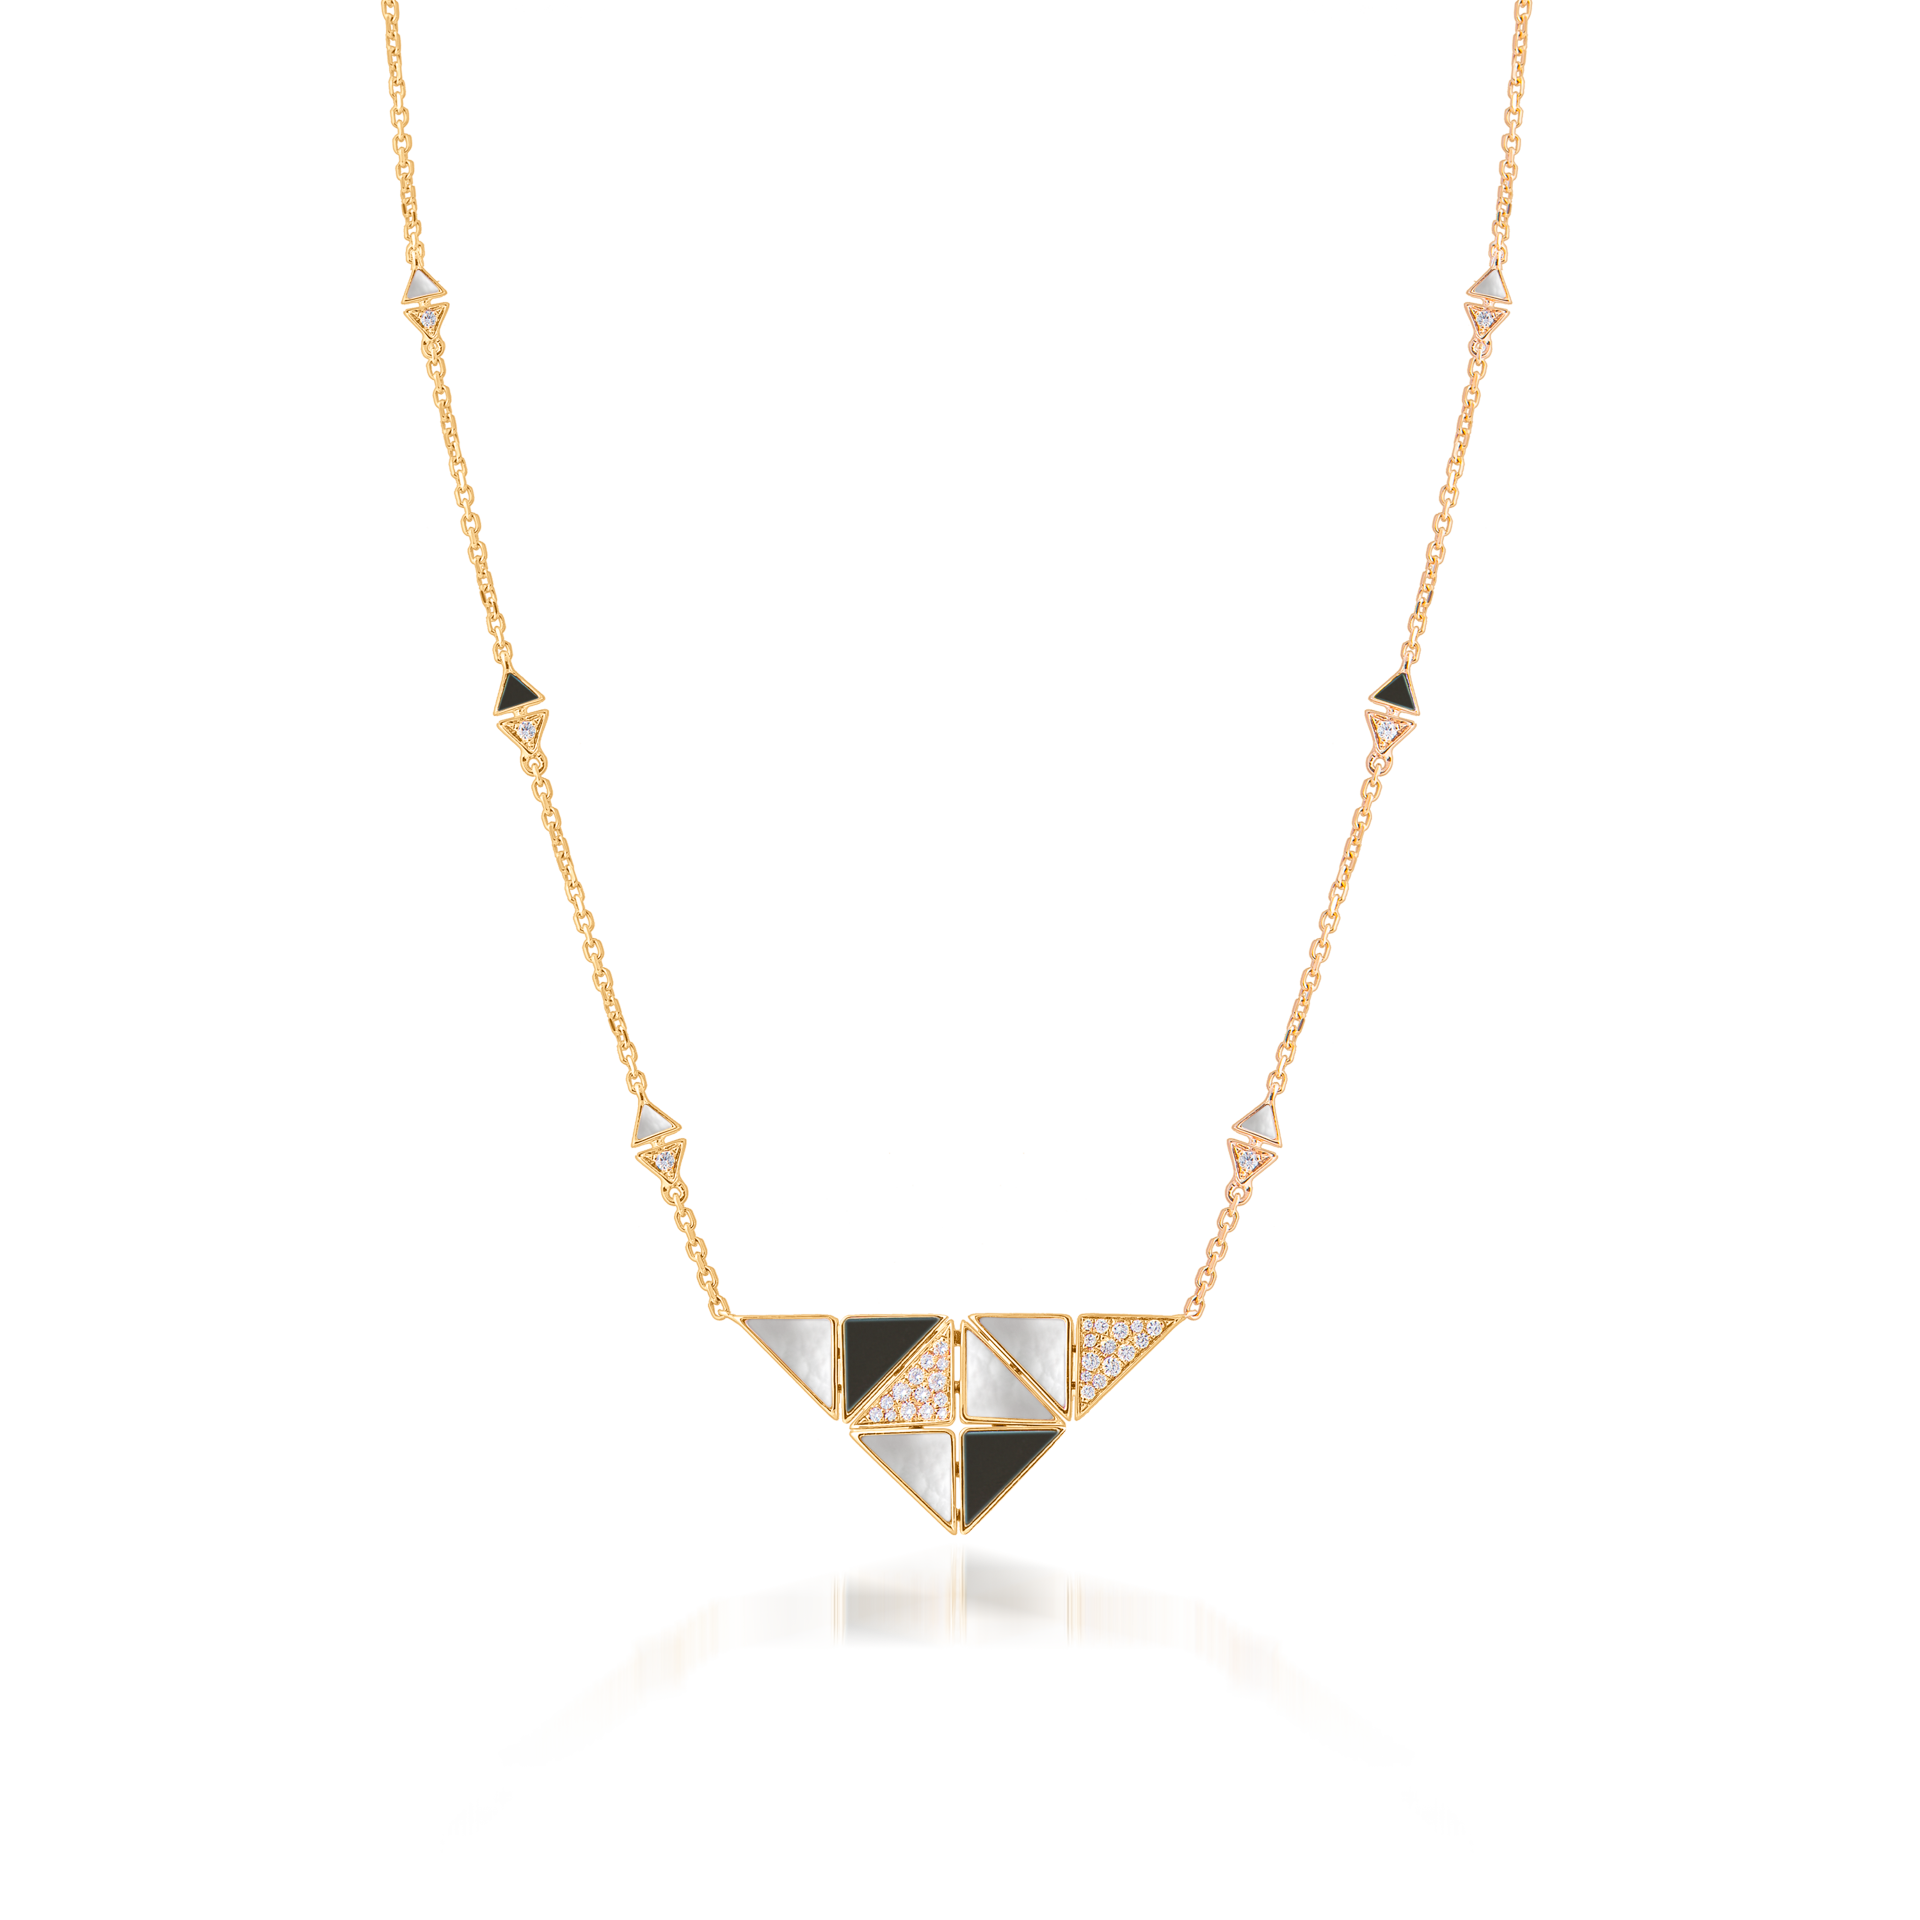 Deco Quadratic Necklace with Black Onyx, White Mother of Pearl and Diamonds  In 18K Yellow Gold